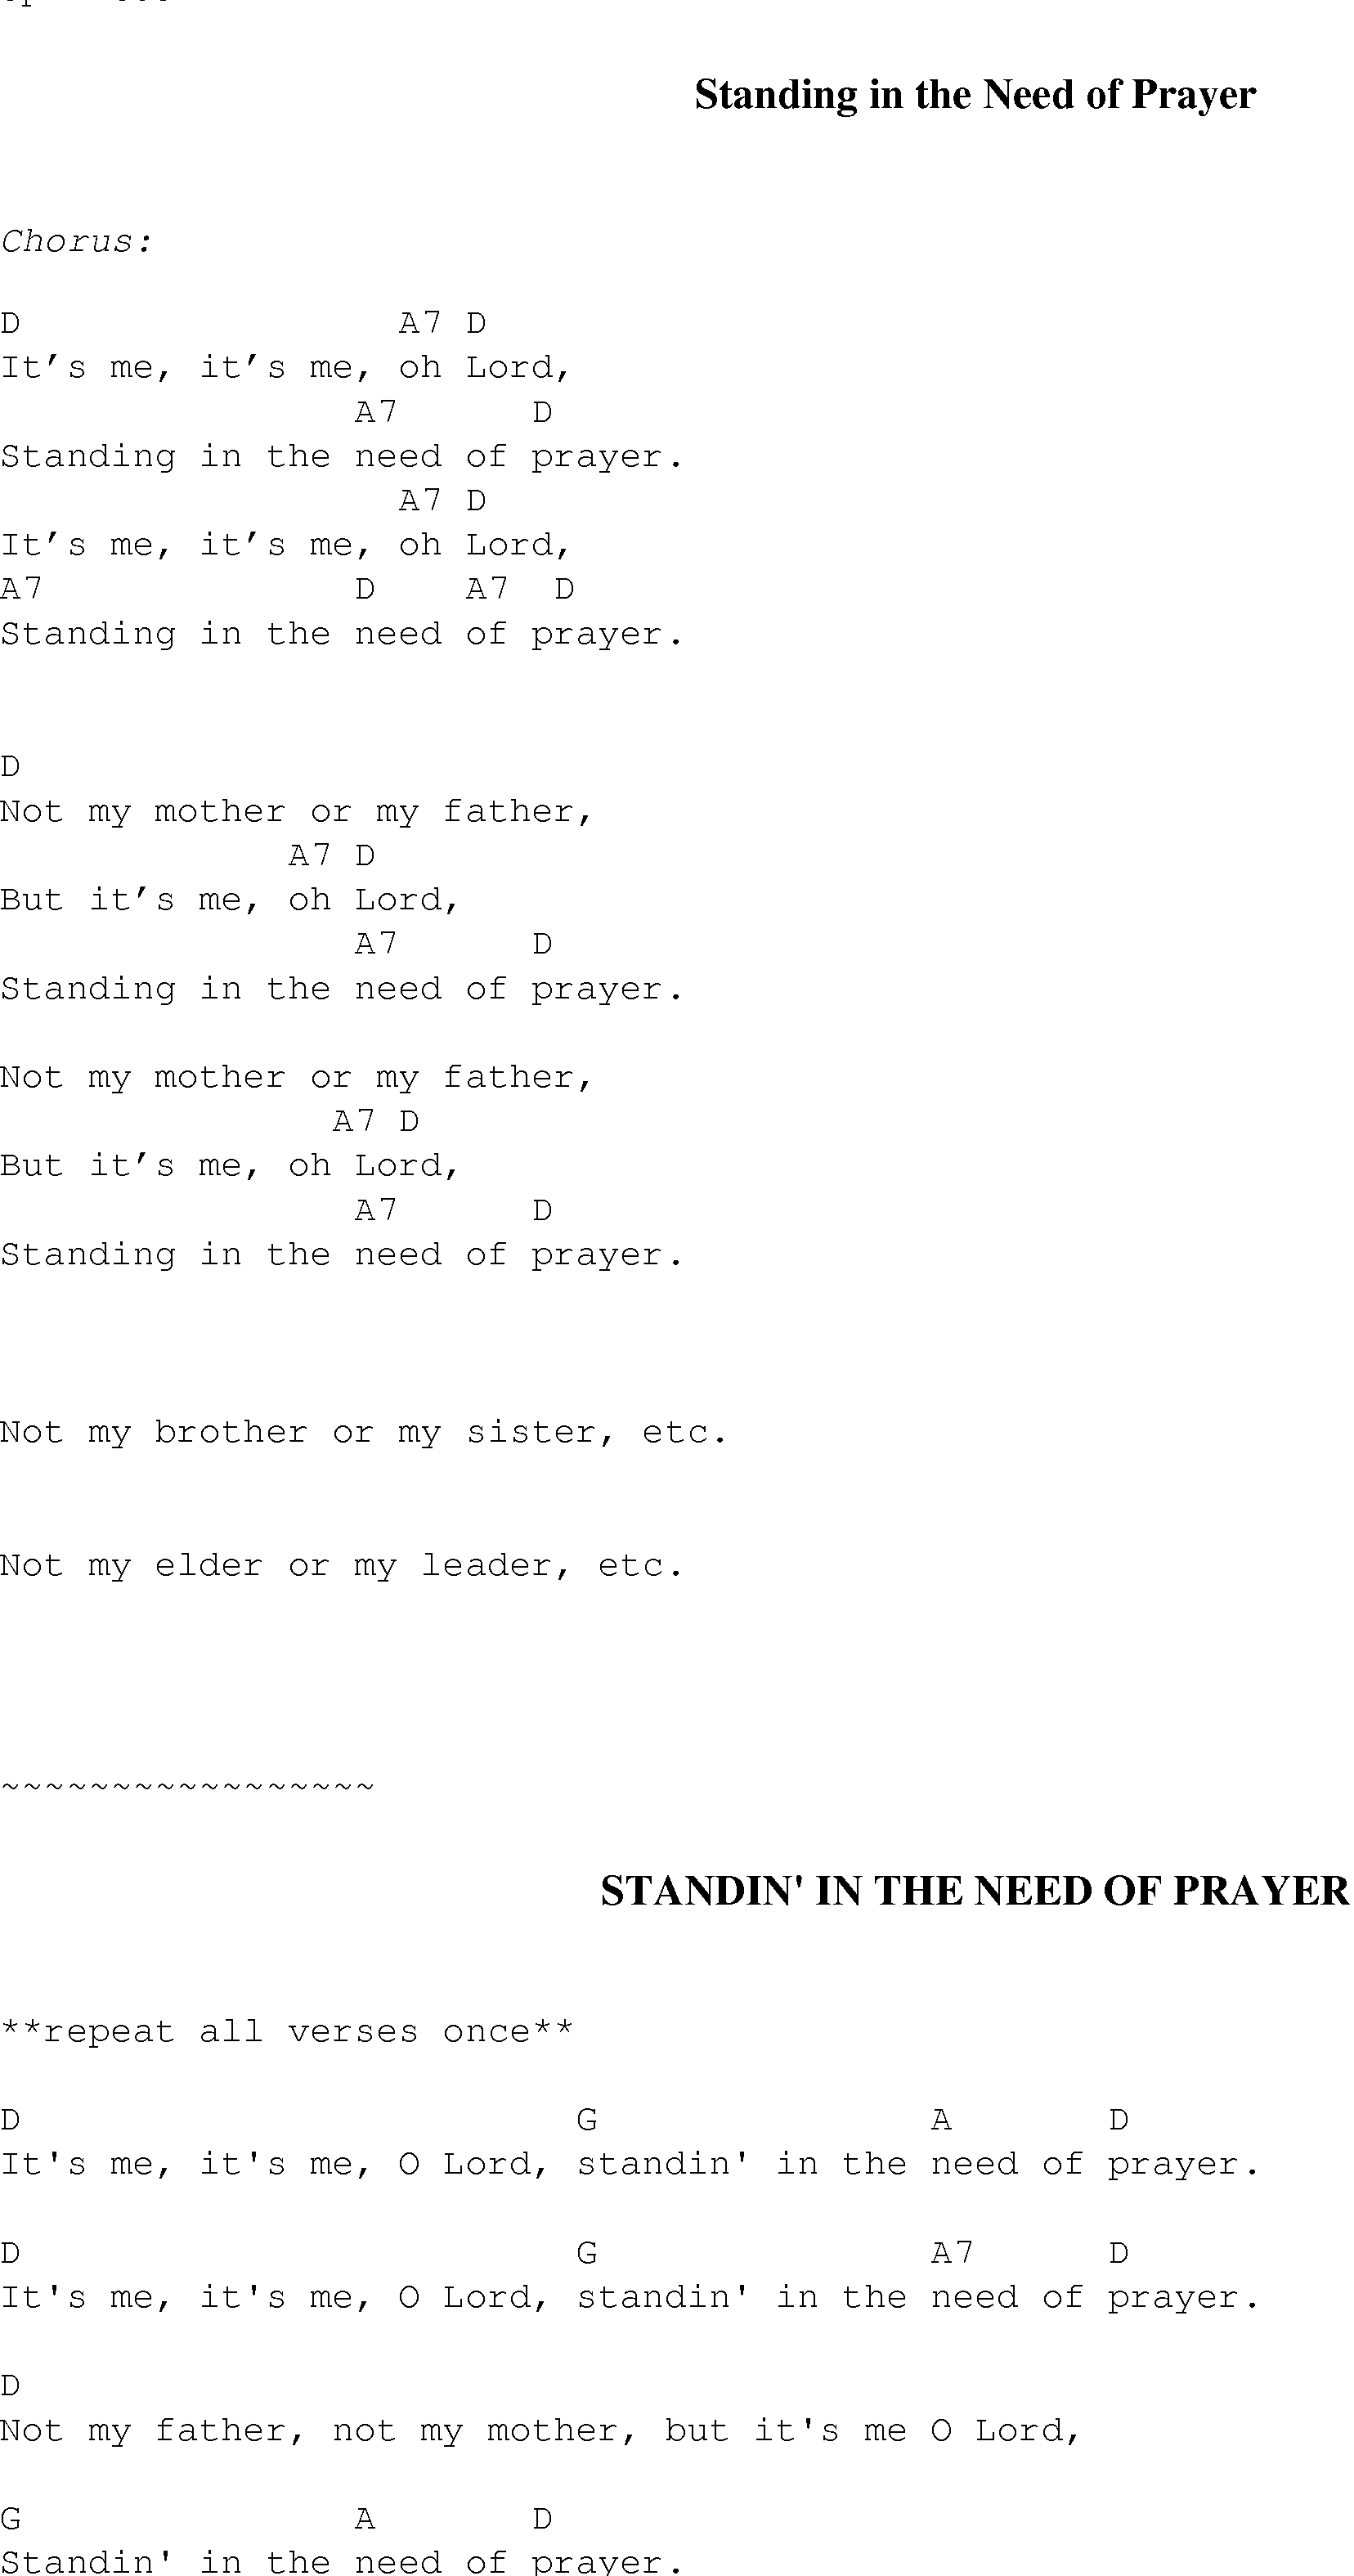 Gospel Song: standing_in_the_need, lyrics and chords.